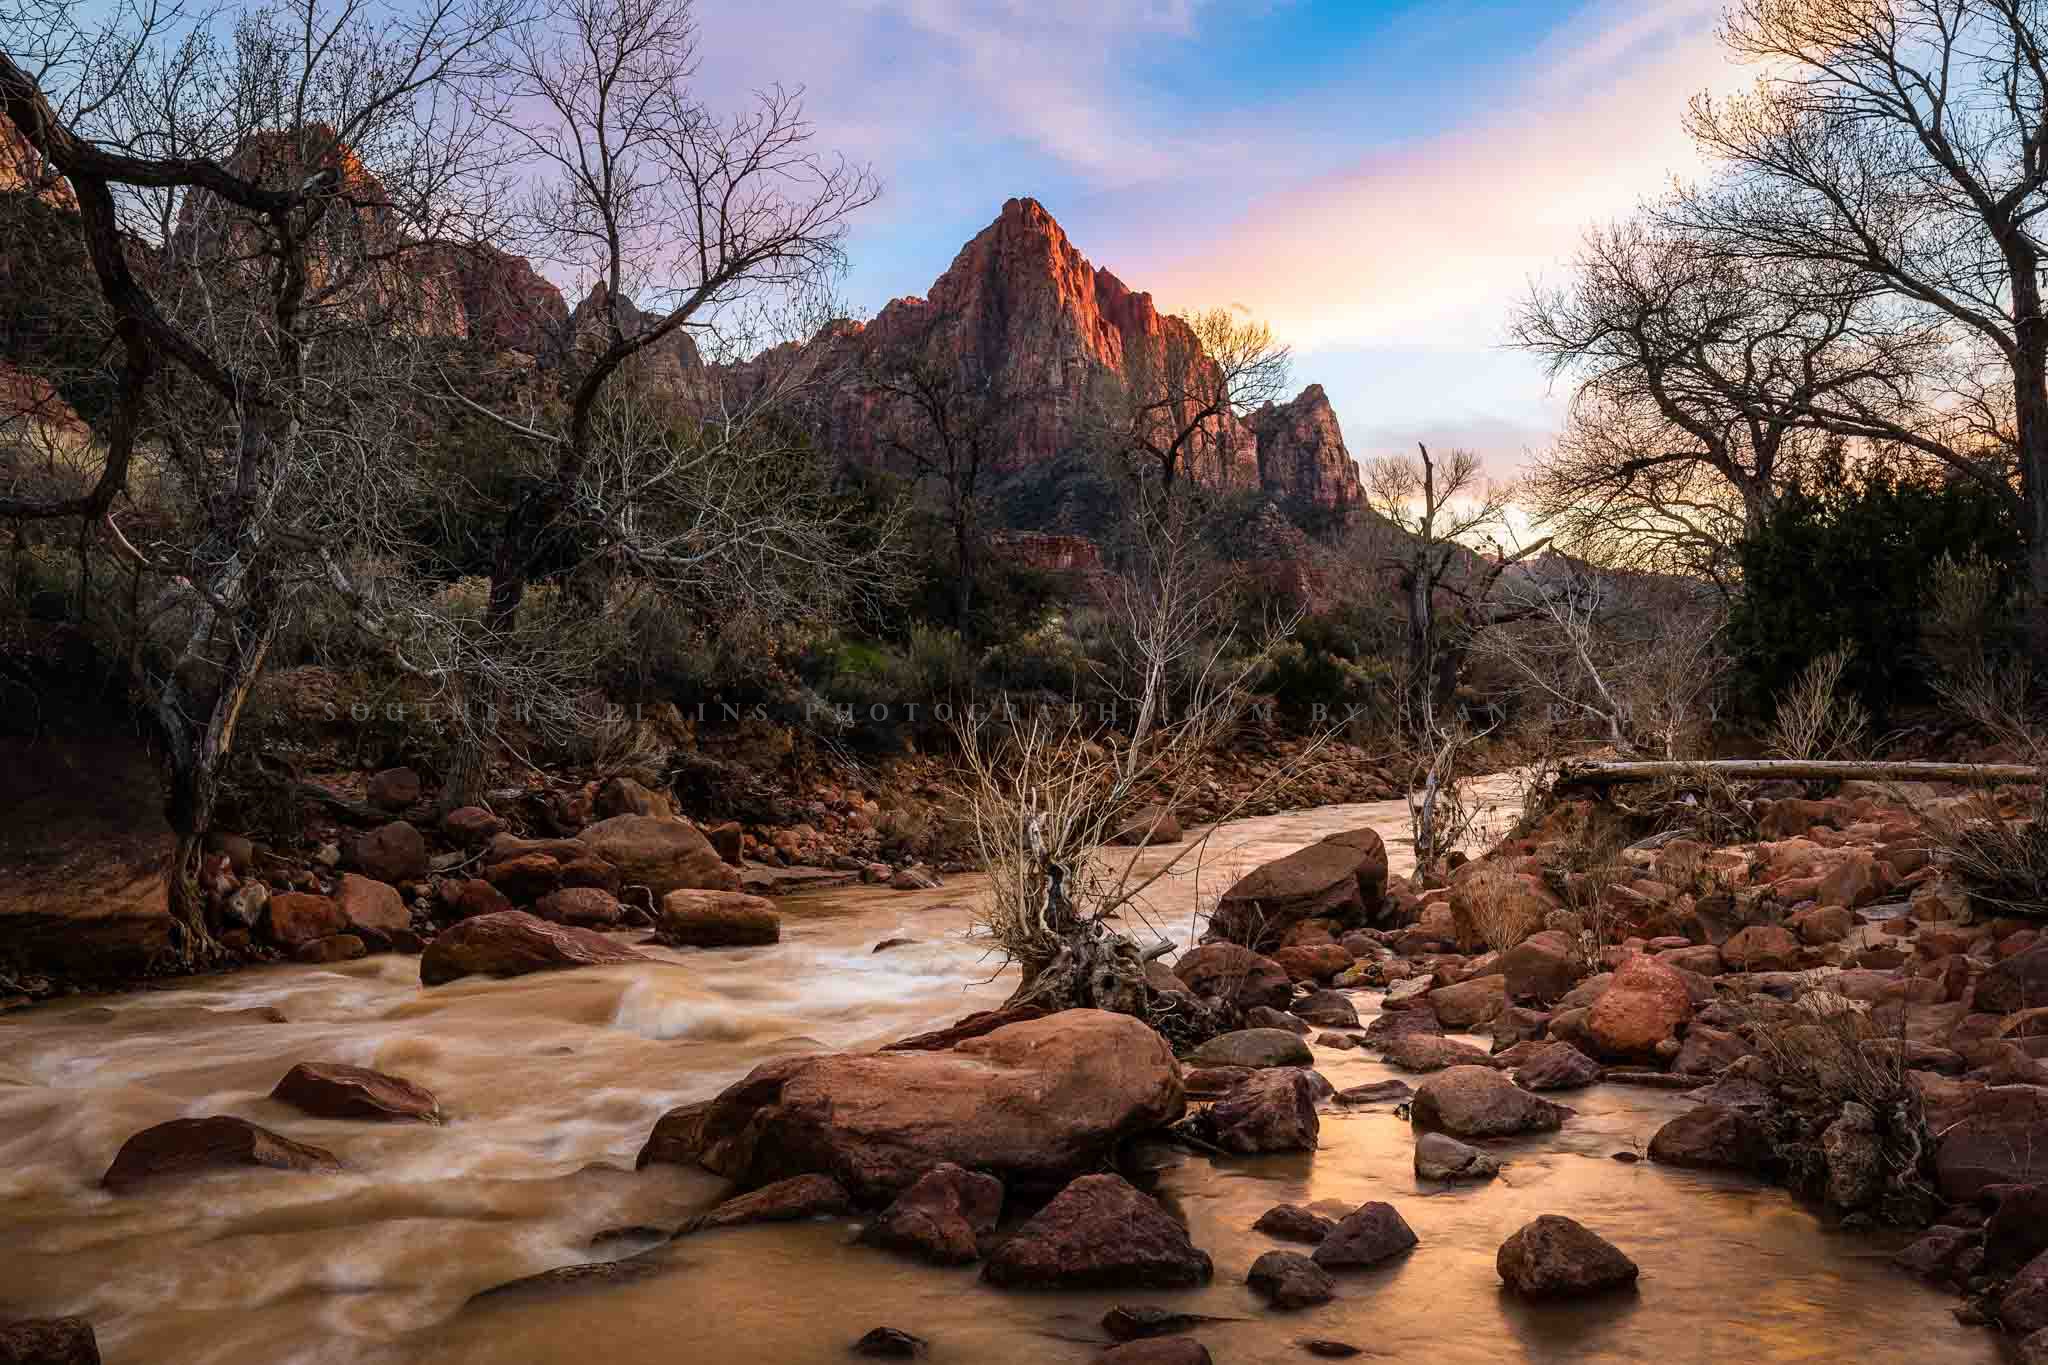 Southwestern landscape photography print of The Watchman overlooking the Virgin River at sunset on a spring evening in Zion National Park, Utah by Sean Ramsey of Southern Plains Photography.